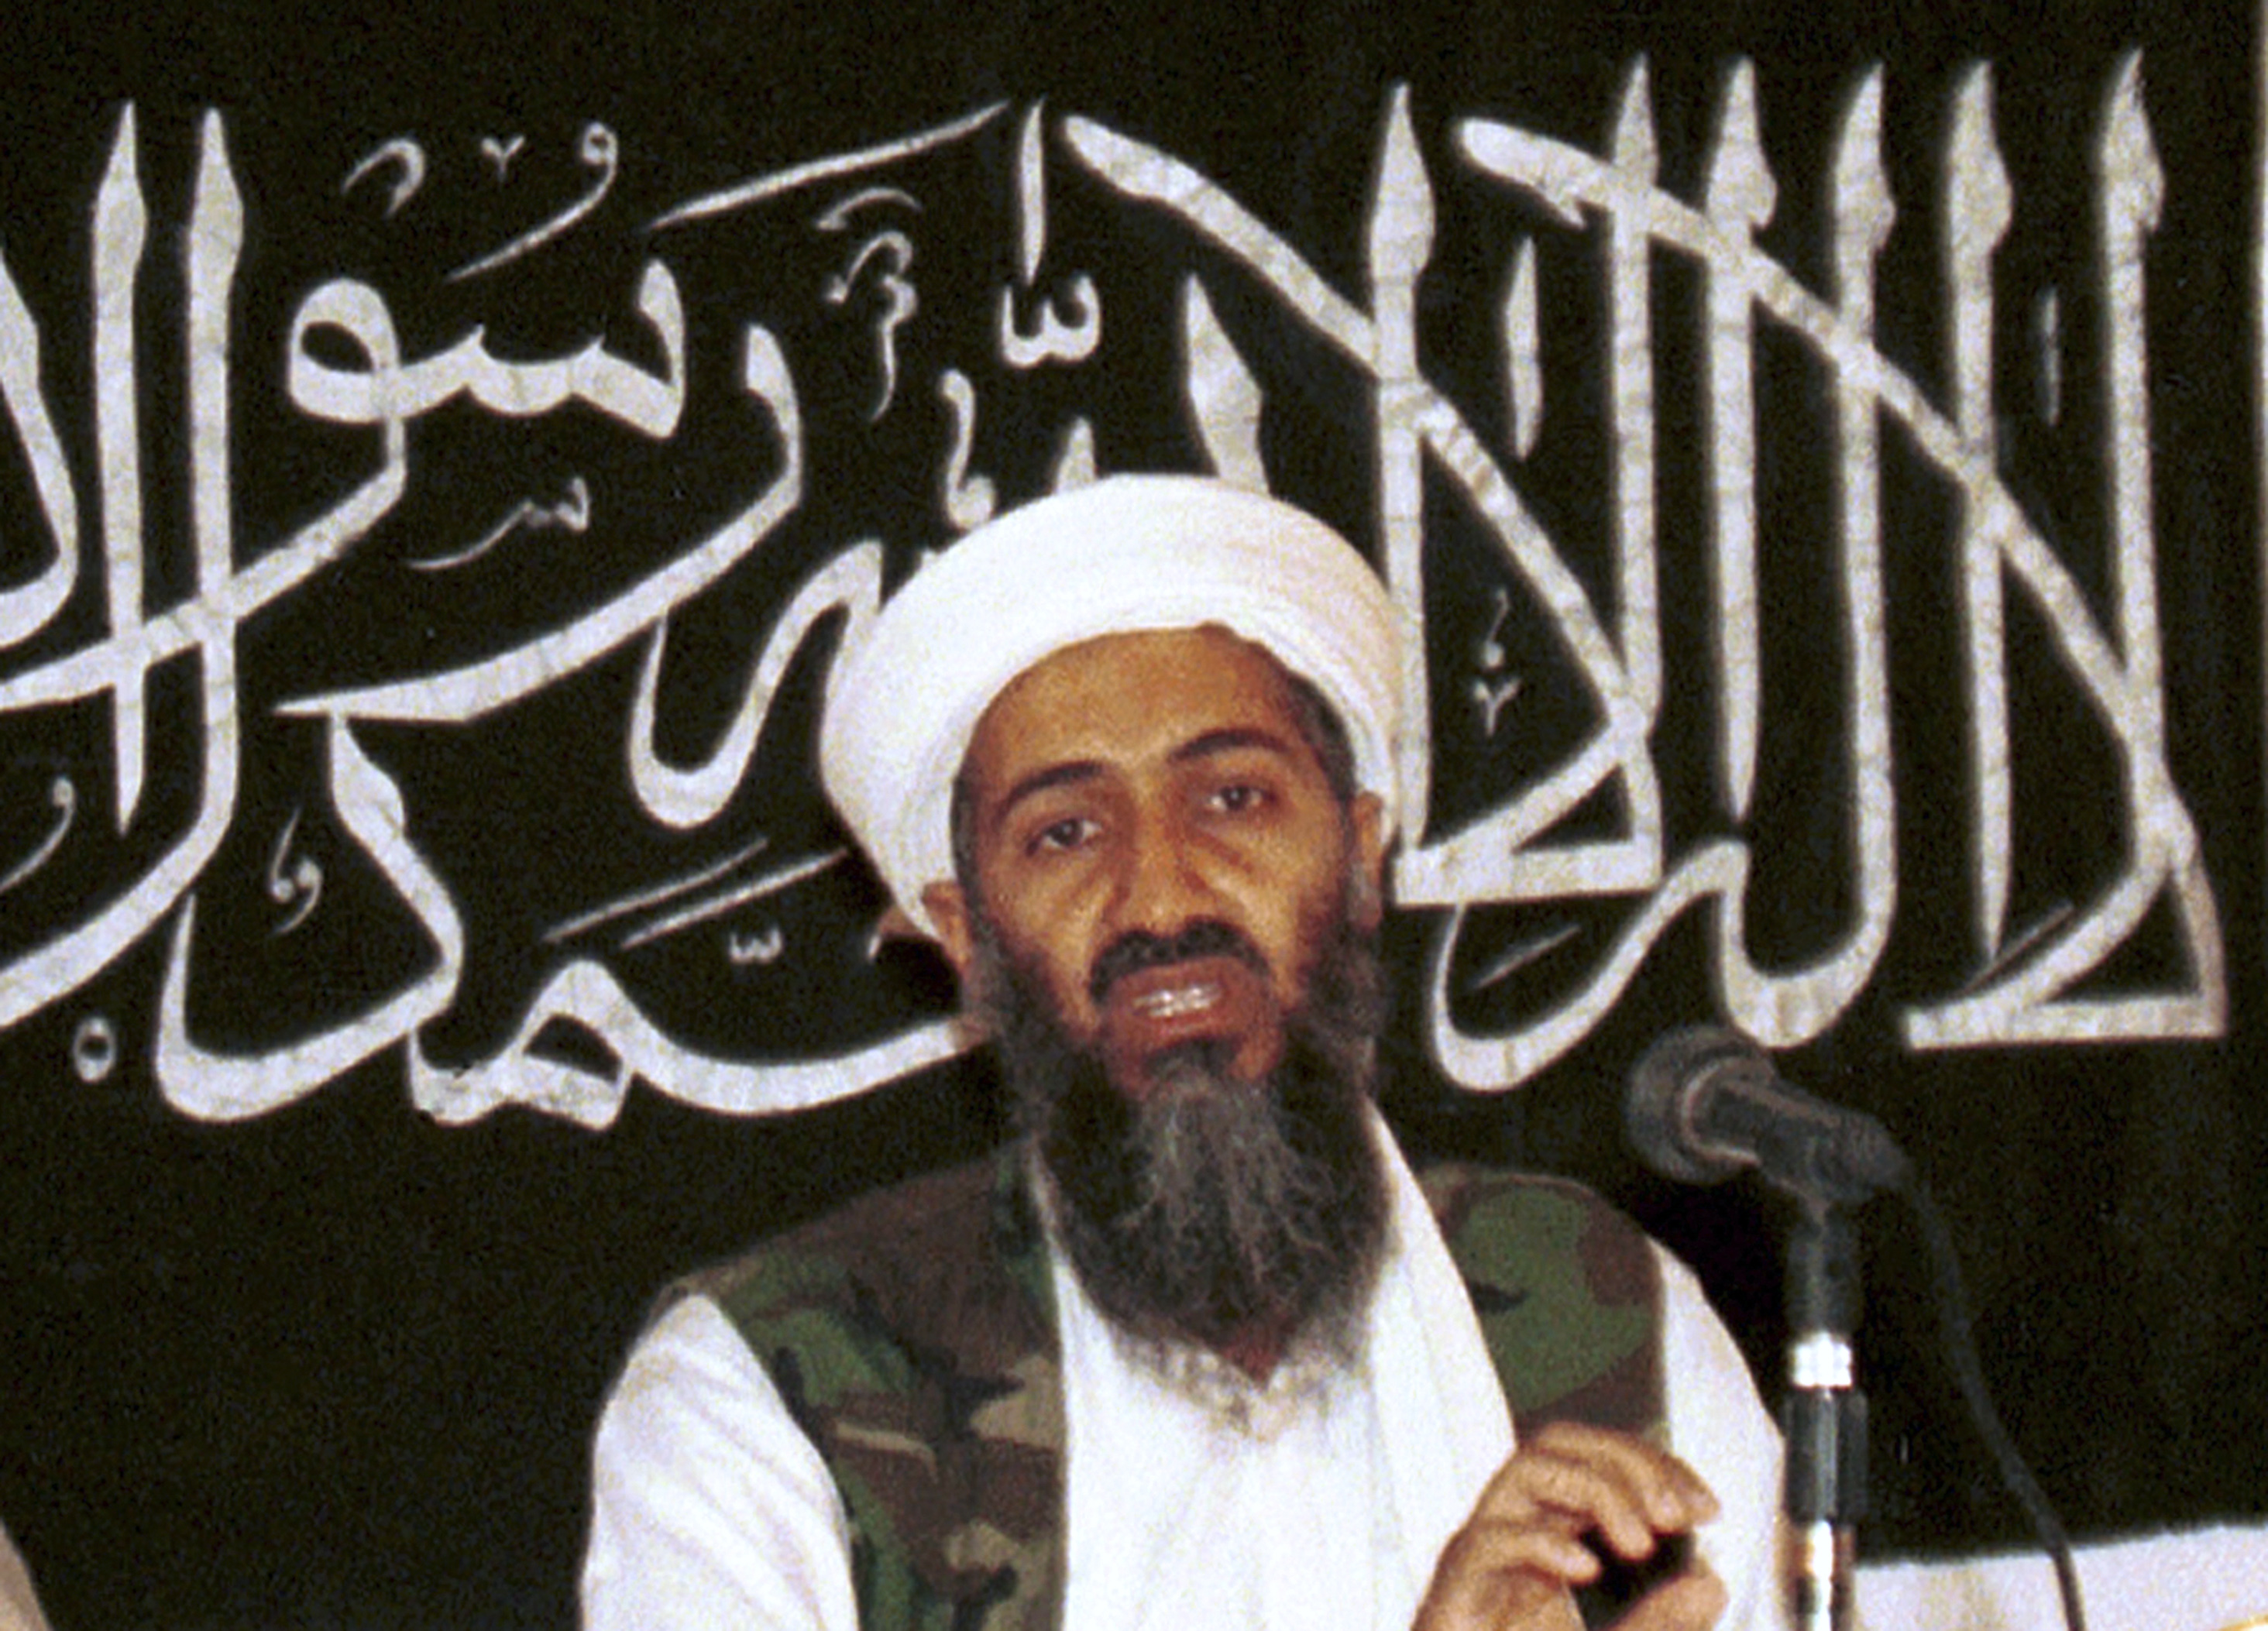 In this 1998 file photo made available on March 19, 2004, Osama bin Laden is seen at a news conference in Khost, Afghanistan. (Mazhar Ali Khan—AP)